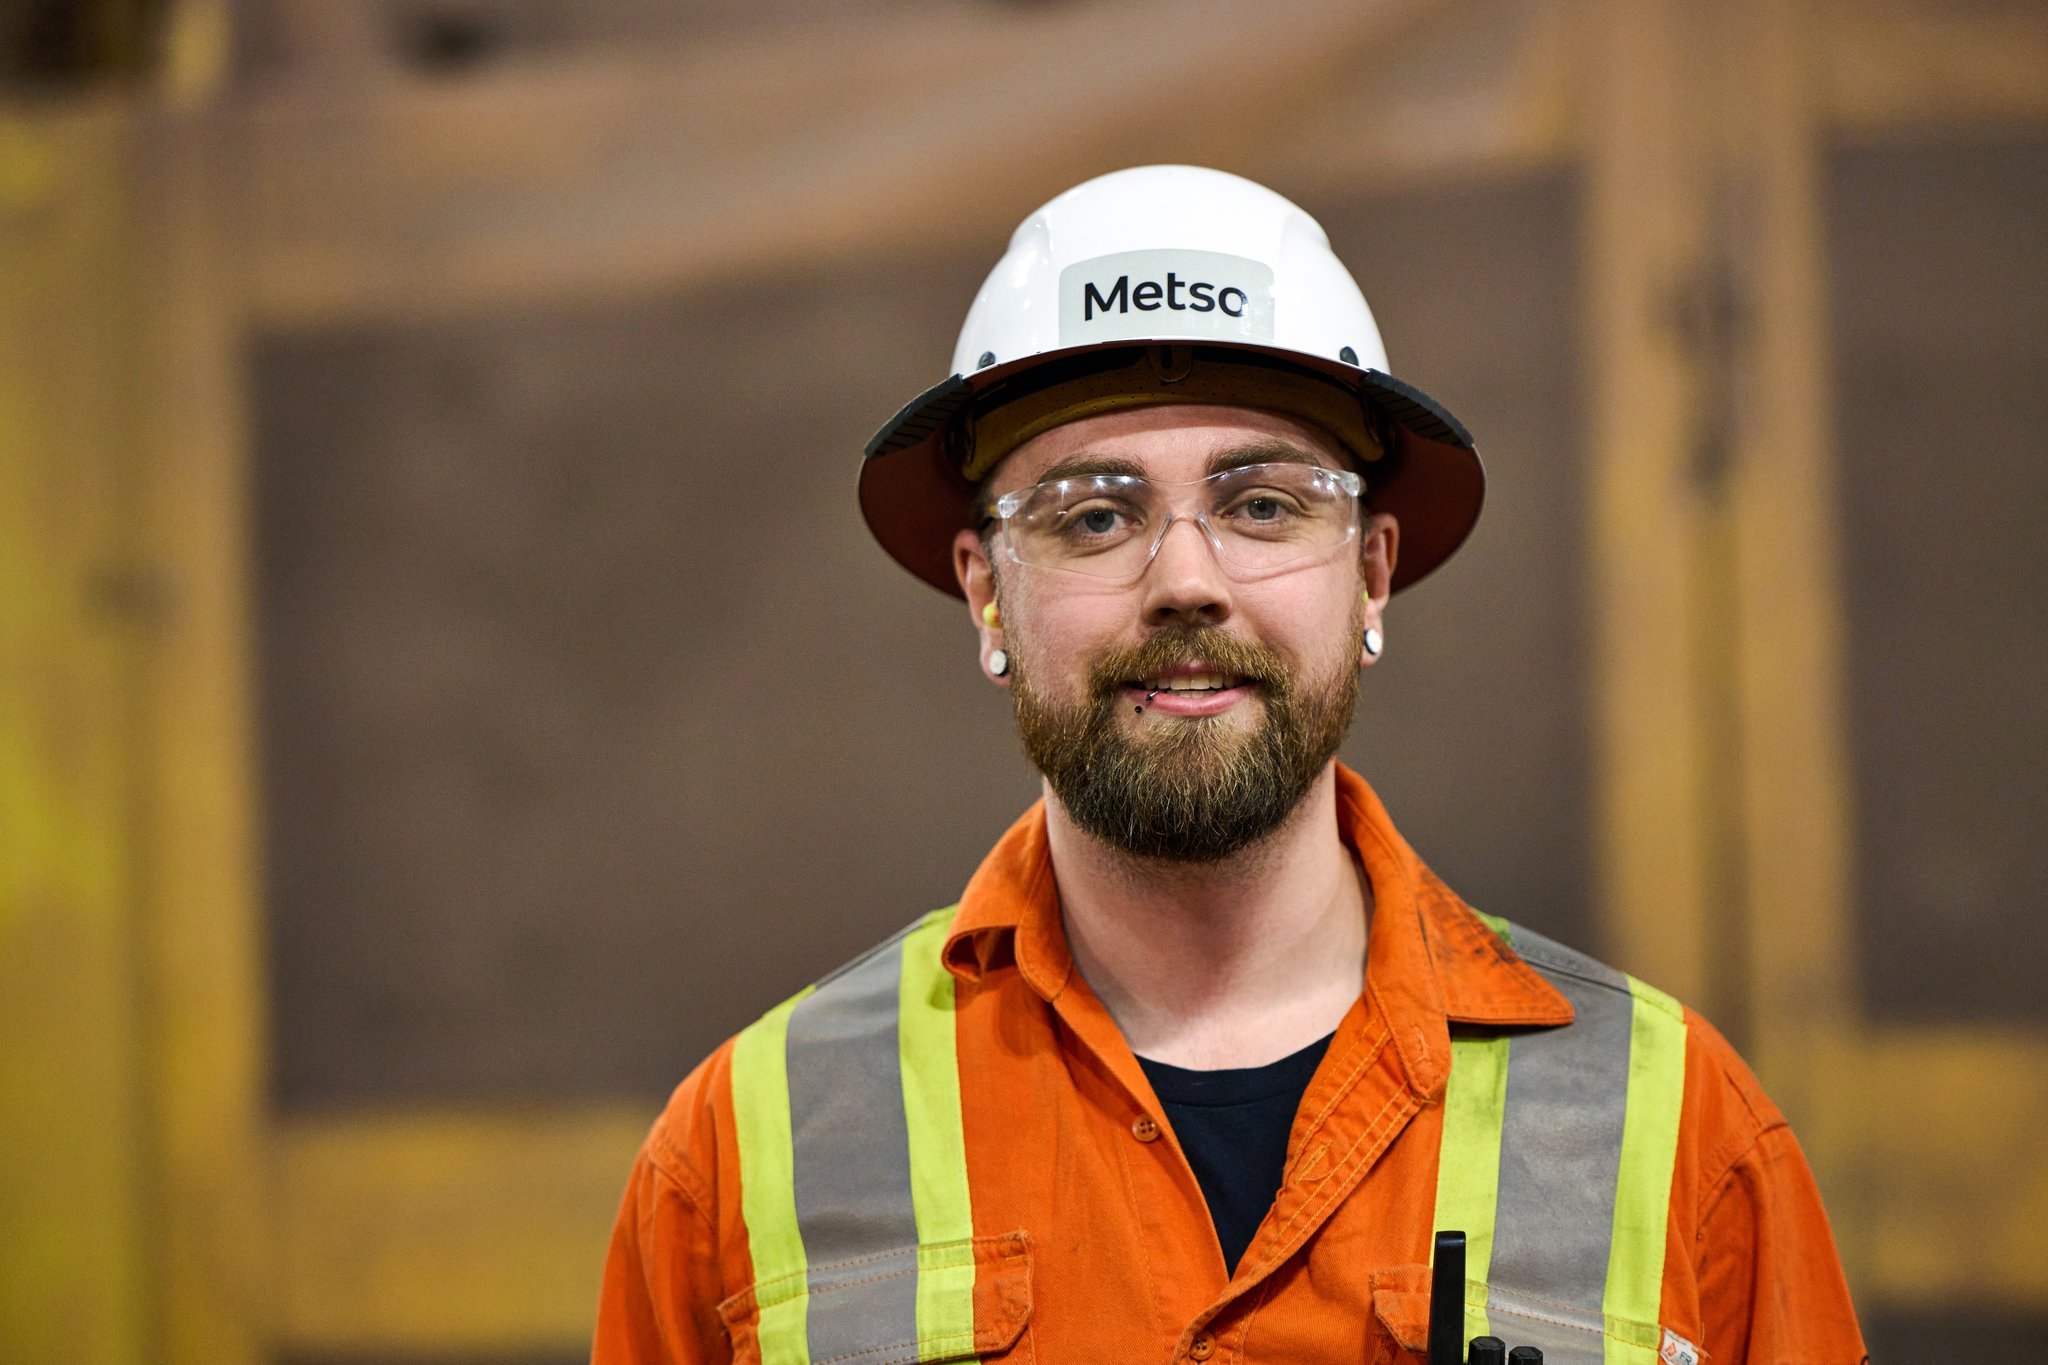 The following is a case study about an industrial mining photography project we completed for metso, a global partner and supplier for businesses in the aggregates, mining, metals refining, and recycling industries. This shoot took place over a 3-day timespan at an iron and ore mining site in northern quebec. The purpose of the project was to capture images, video clips, and team testimonials of metso employees replacing a large piece of machinery for marketing